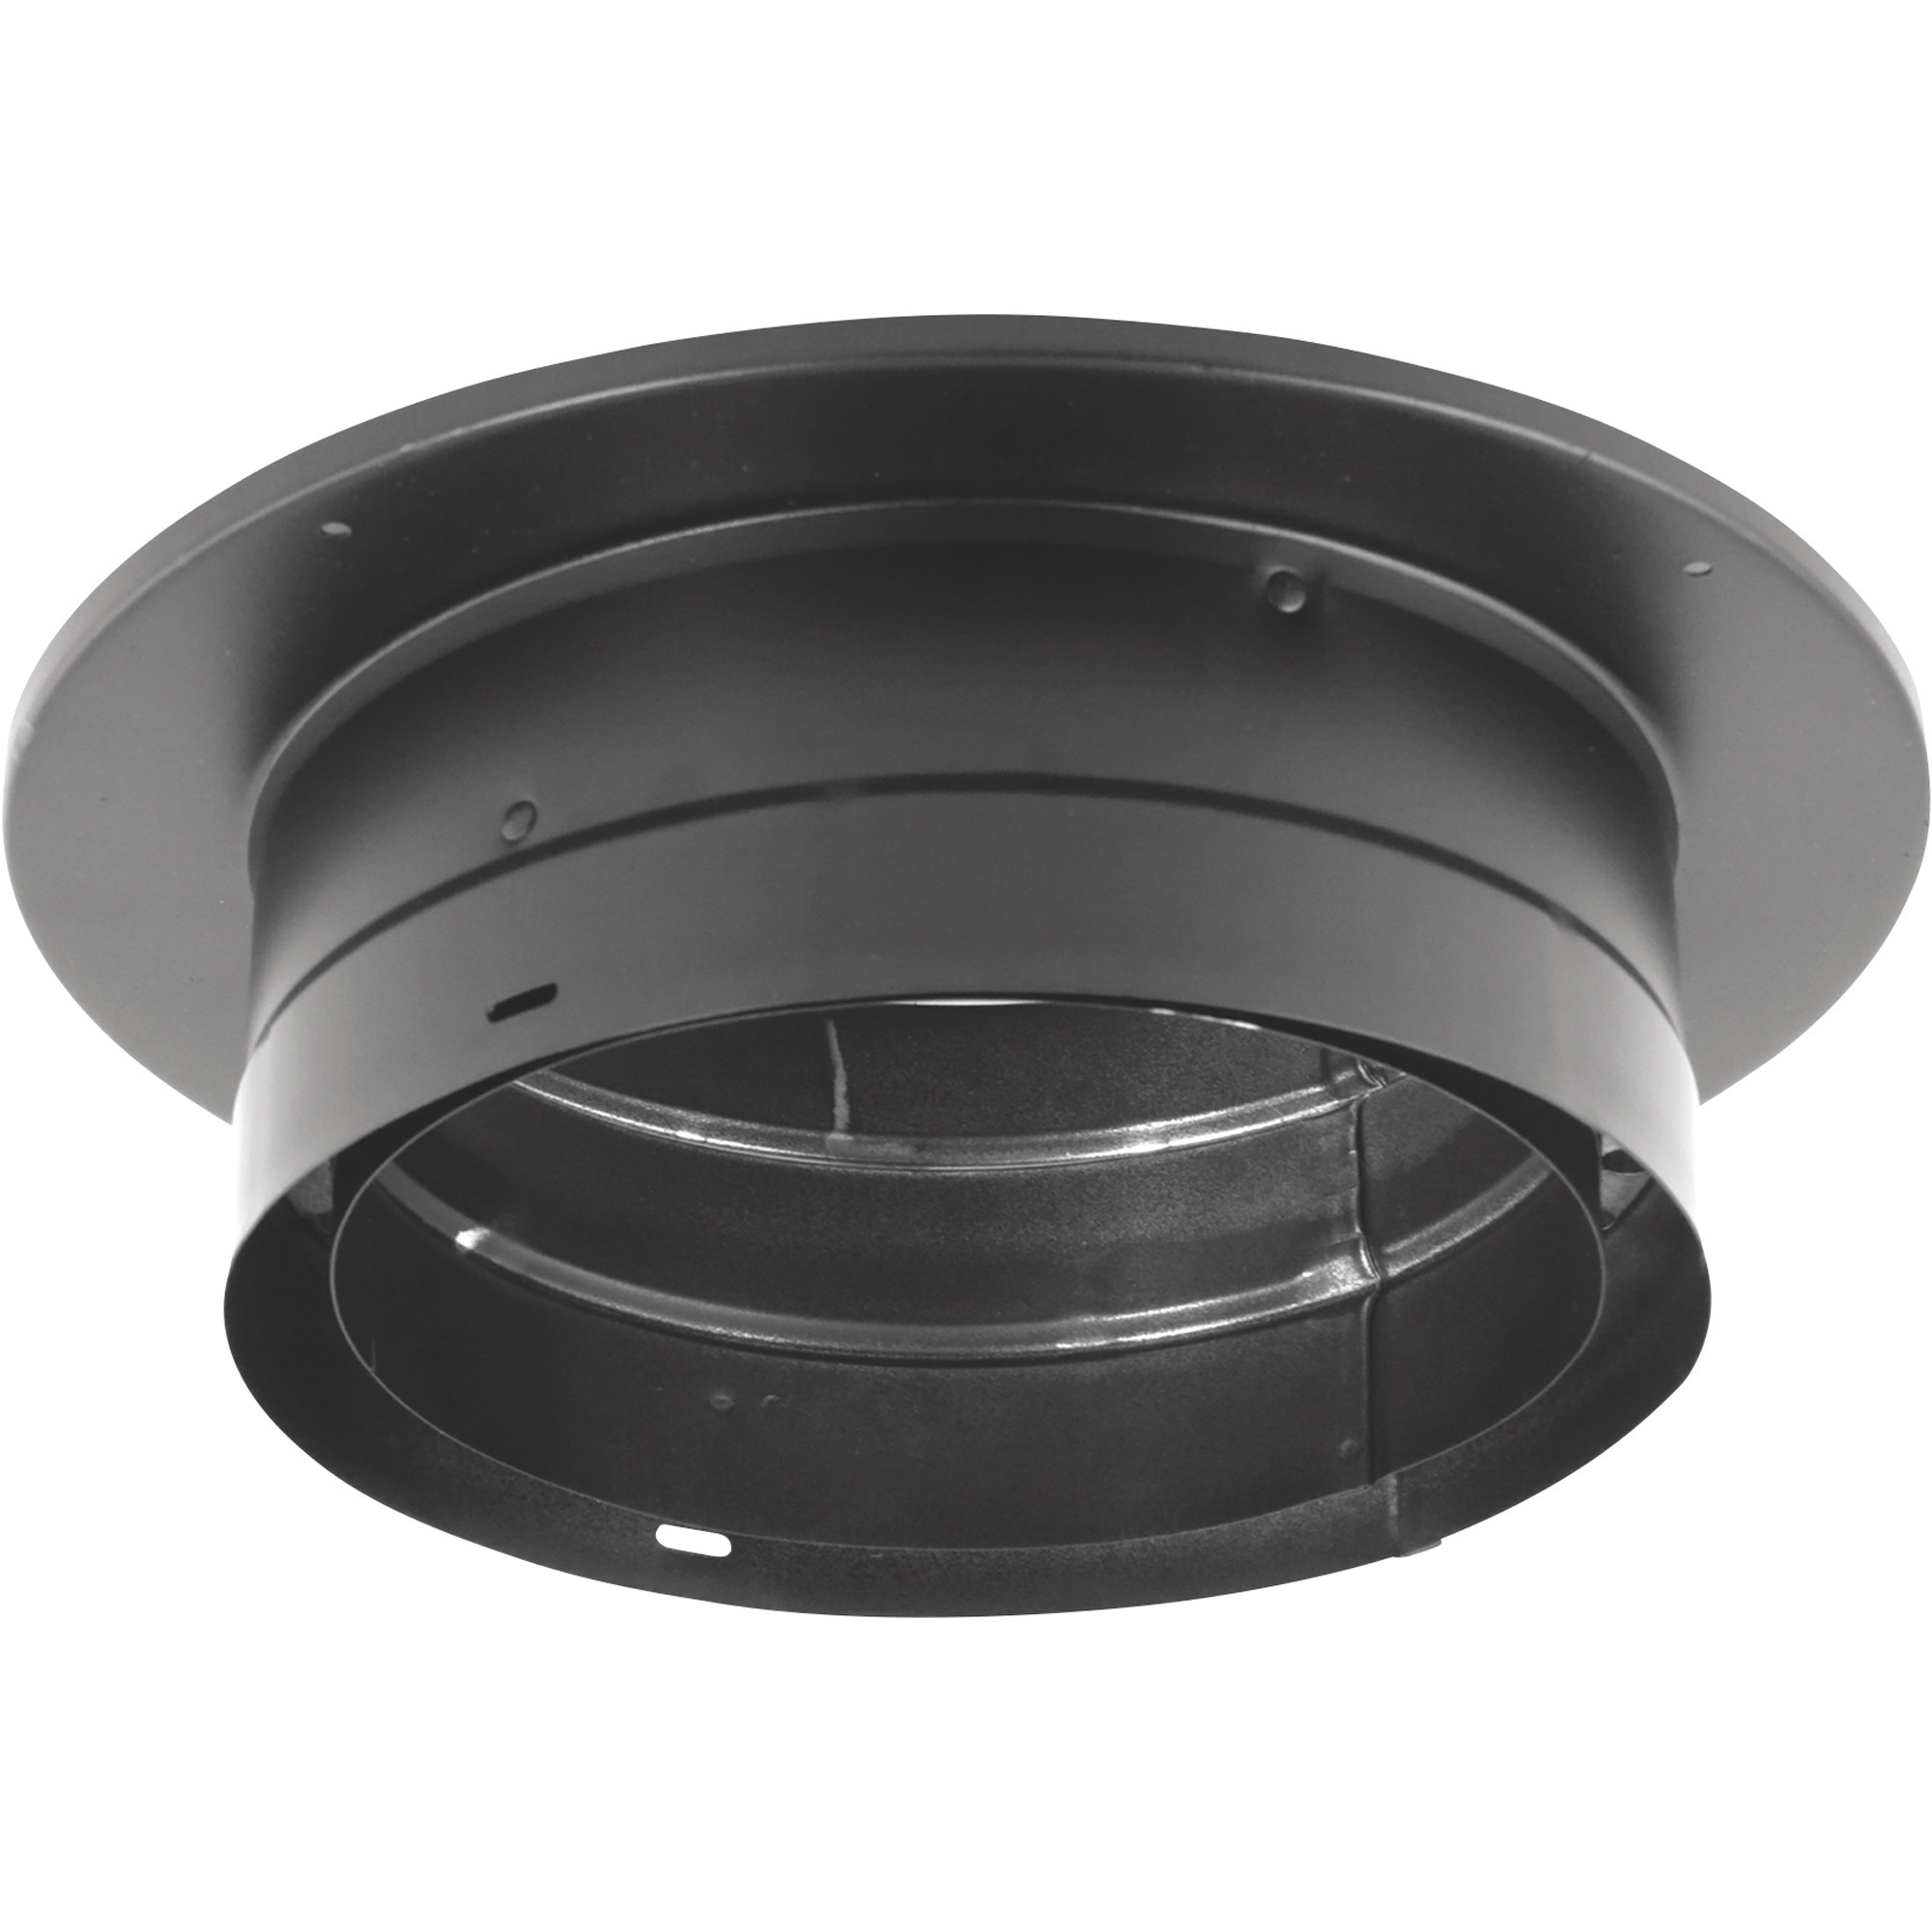 Duravent 6 In. Basic Through the Ceiling Kit